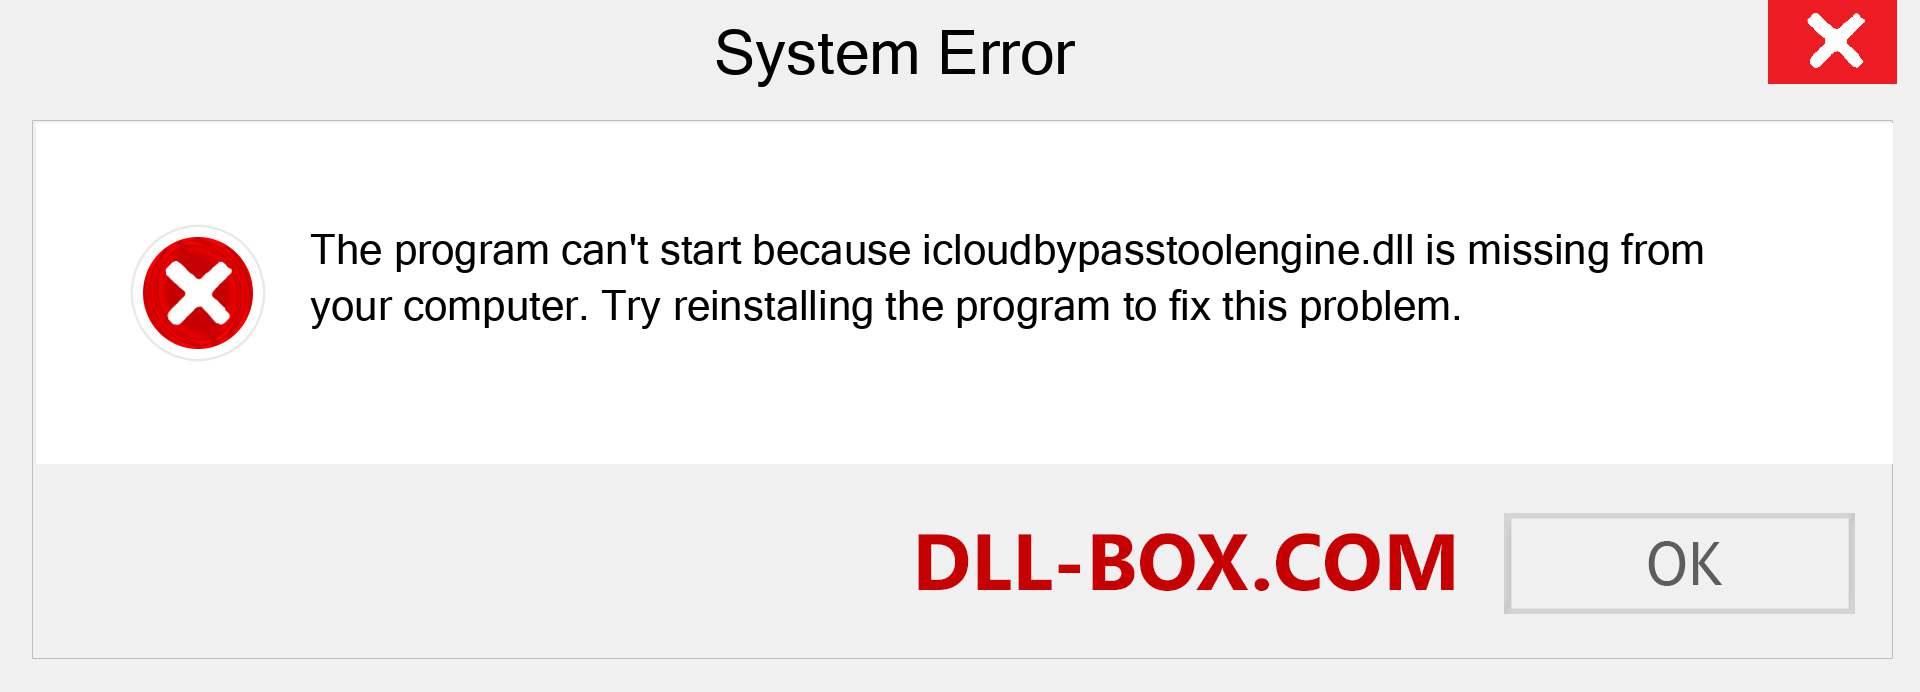  icloudbypasstoolengine.dll file is missing?. Download for Windows 7, 8, 10 - Fix  icloudbypasstoolengine dll Missing Error on Windows, photos, images